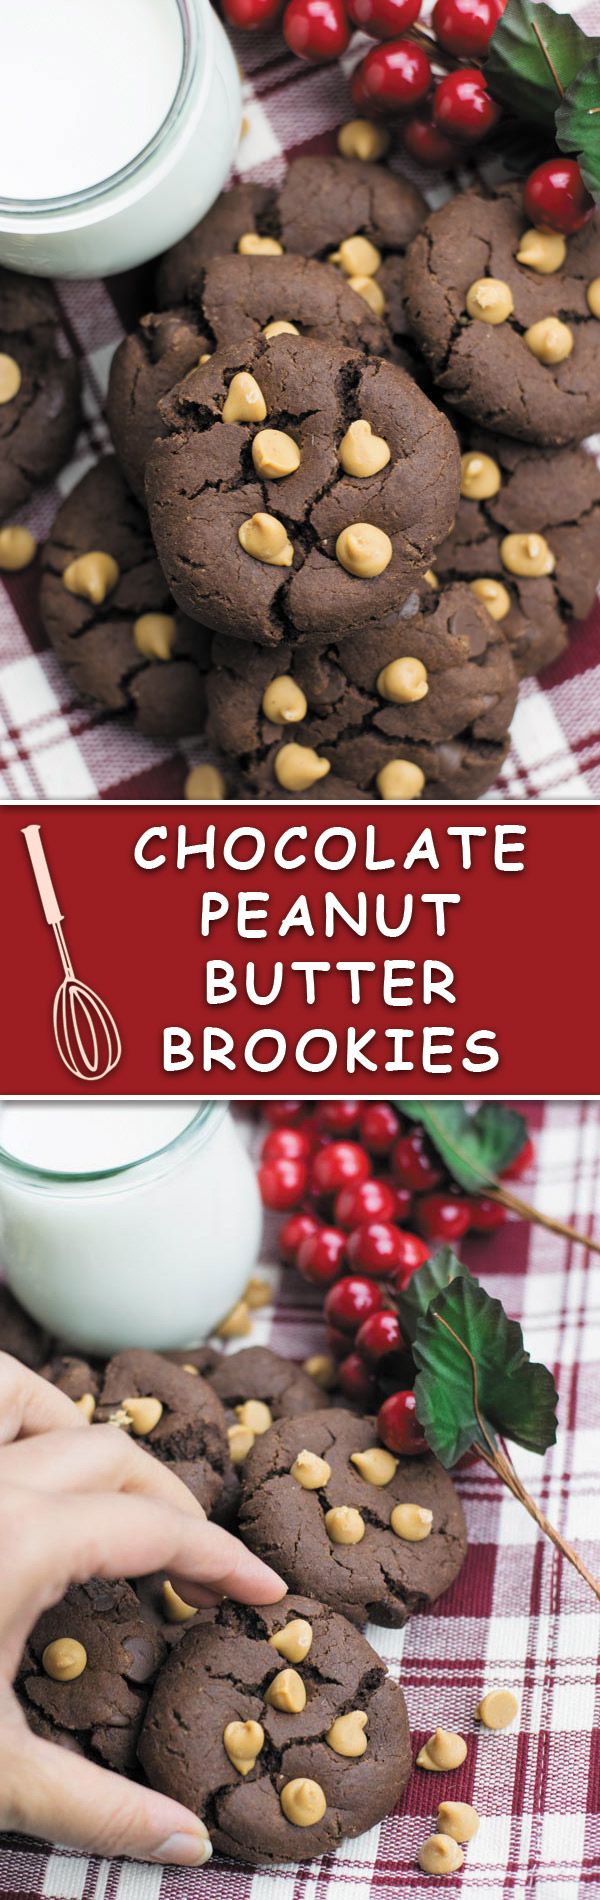 Chocolate PB Brookies - easy, eggless CHOCOLATE BROWNIE COOKIES with PEANUT BUTTER. Popular holiday treat!